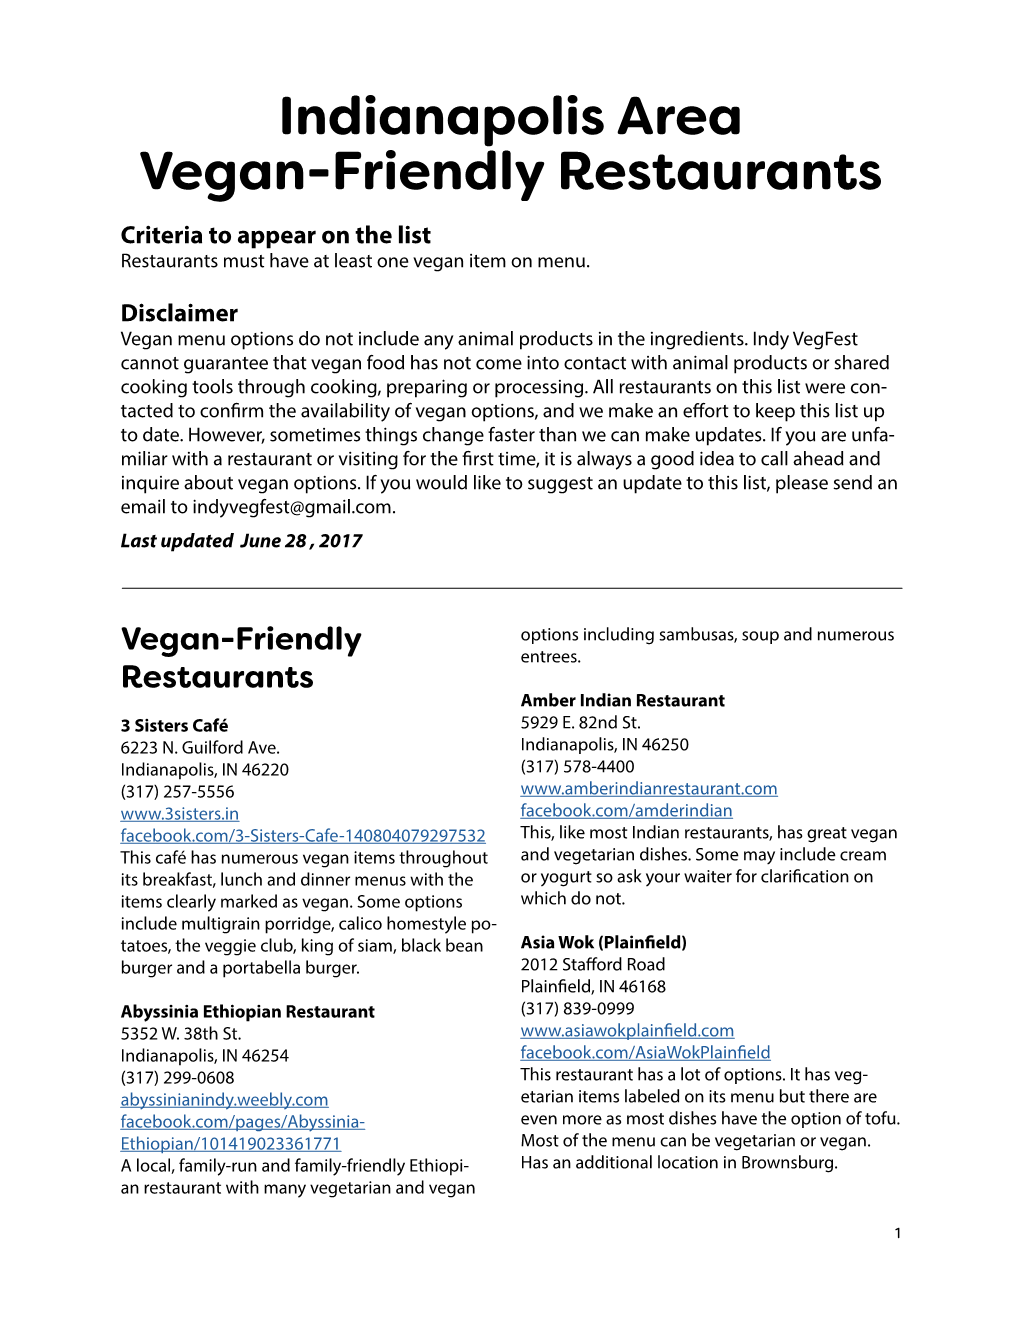 Indianapolis Area Vegan-Friendly Restaurants Criteria to Appear on the List Restaurants Must Have at Least One Vegan Item on Menu